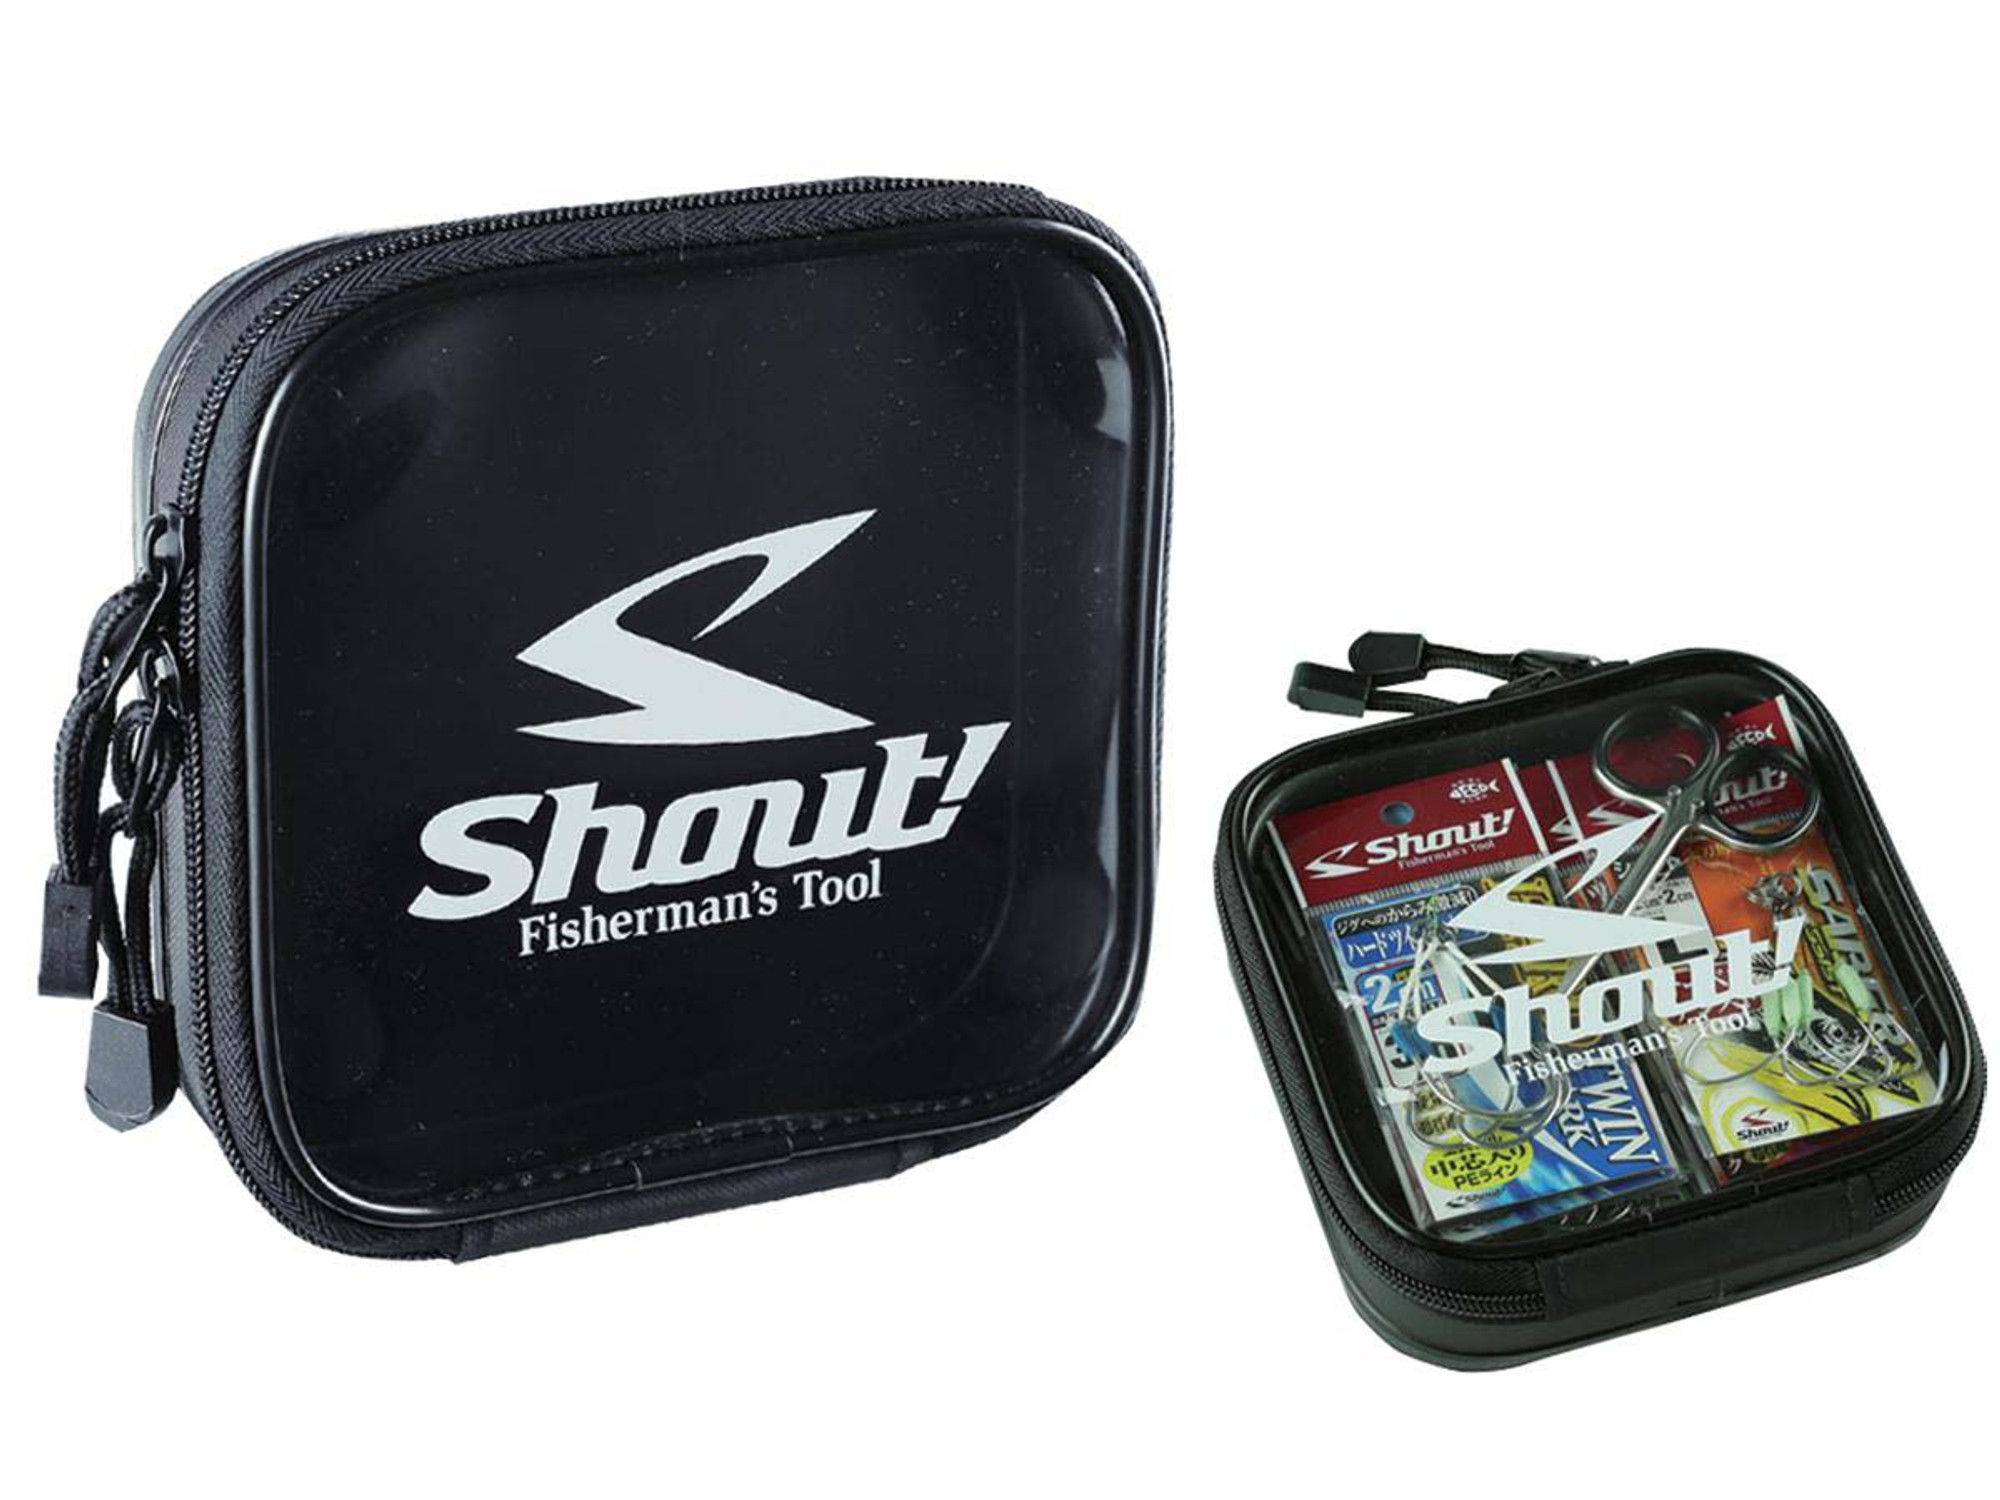 Shout! Fisherman's Tackle Assist Case IV Hook Storage Container